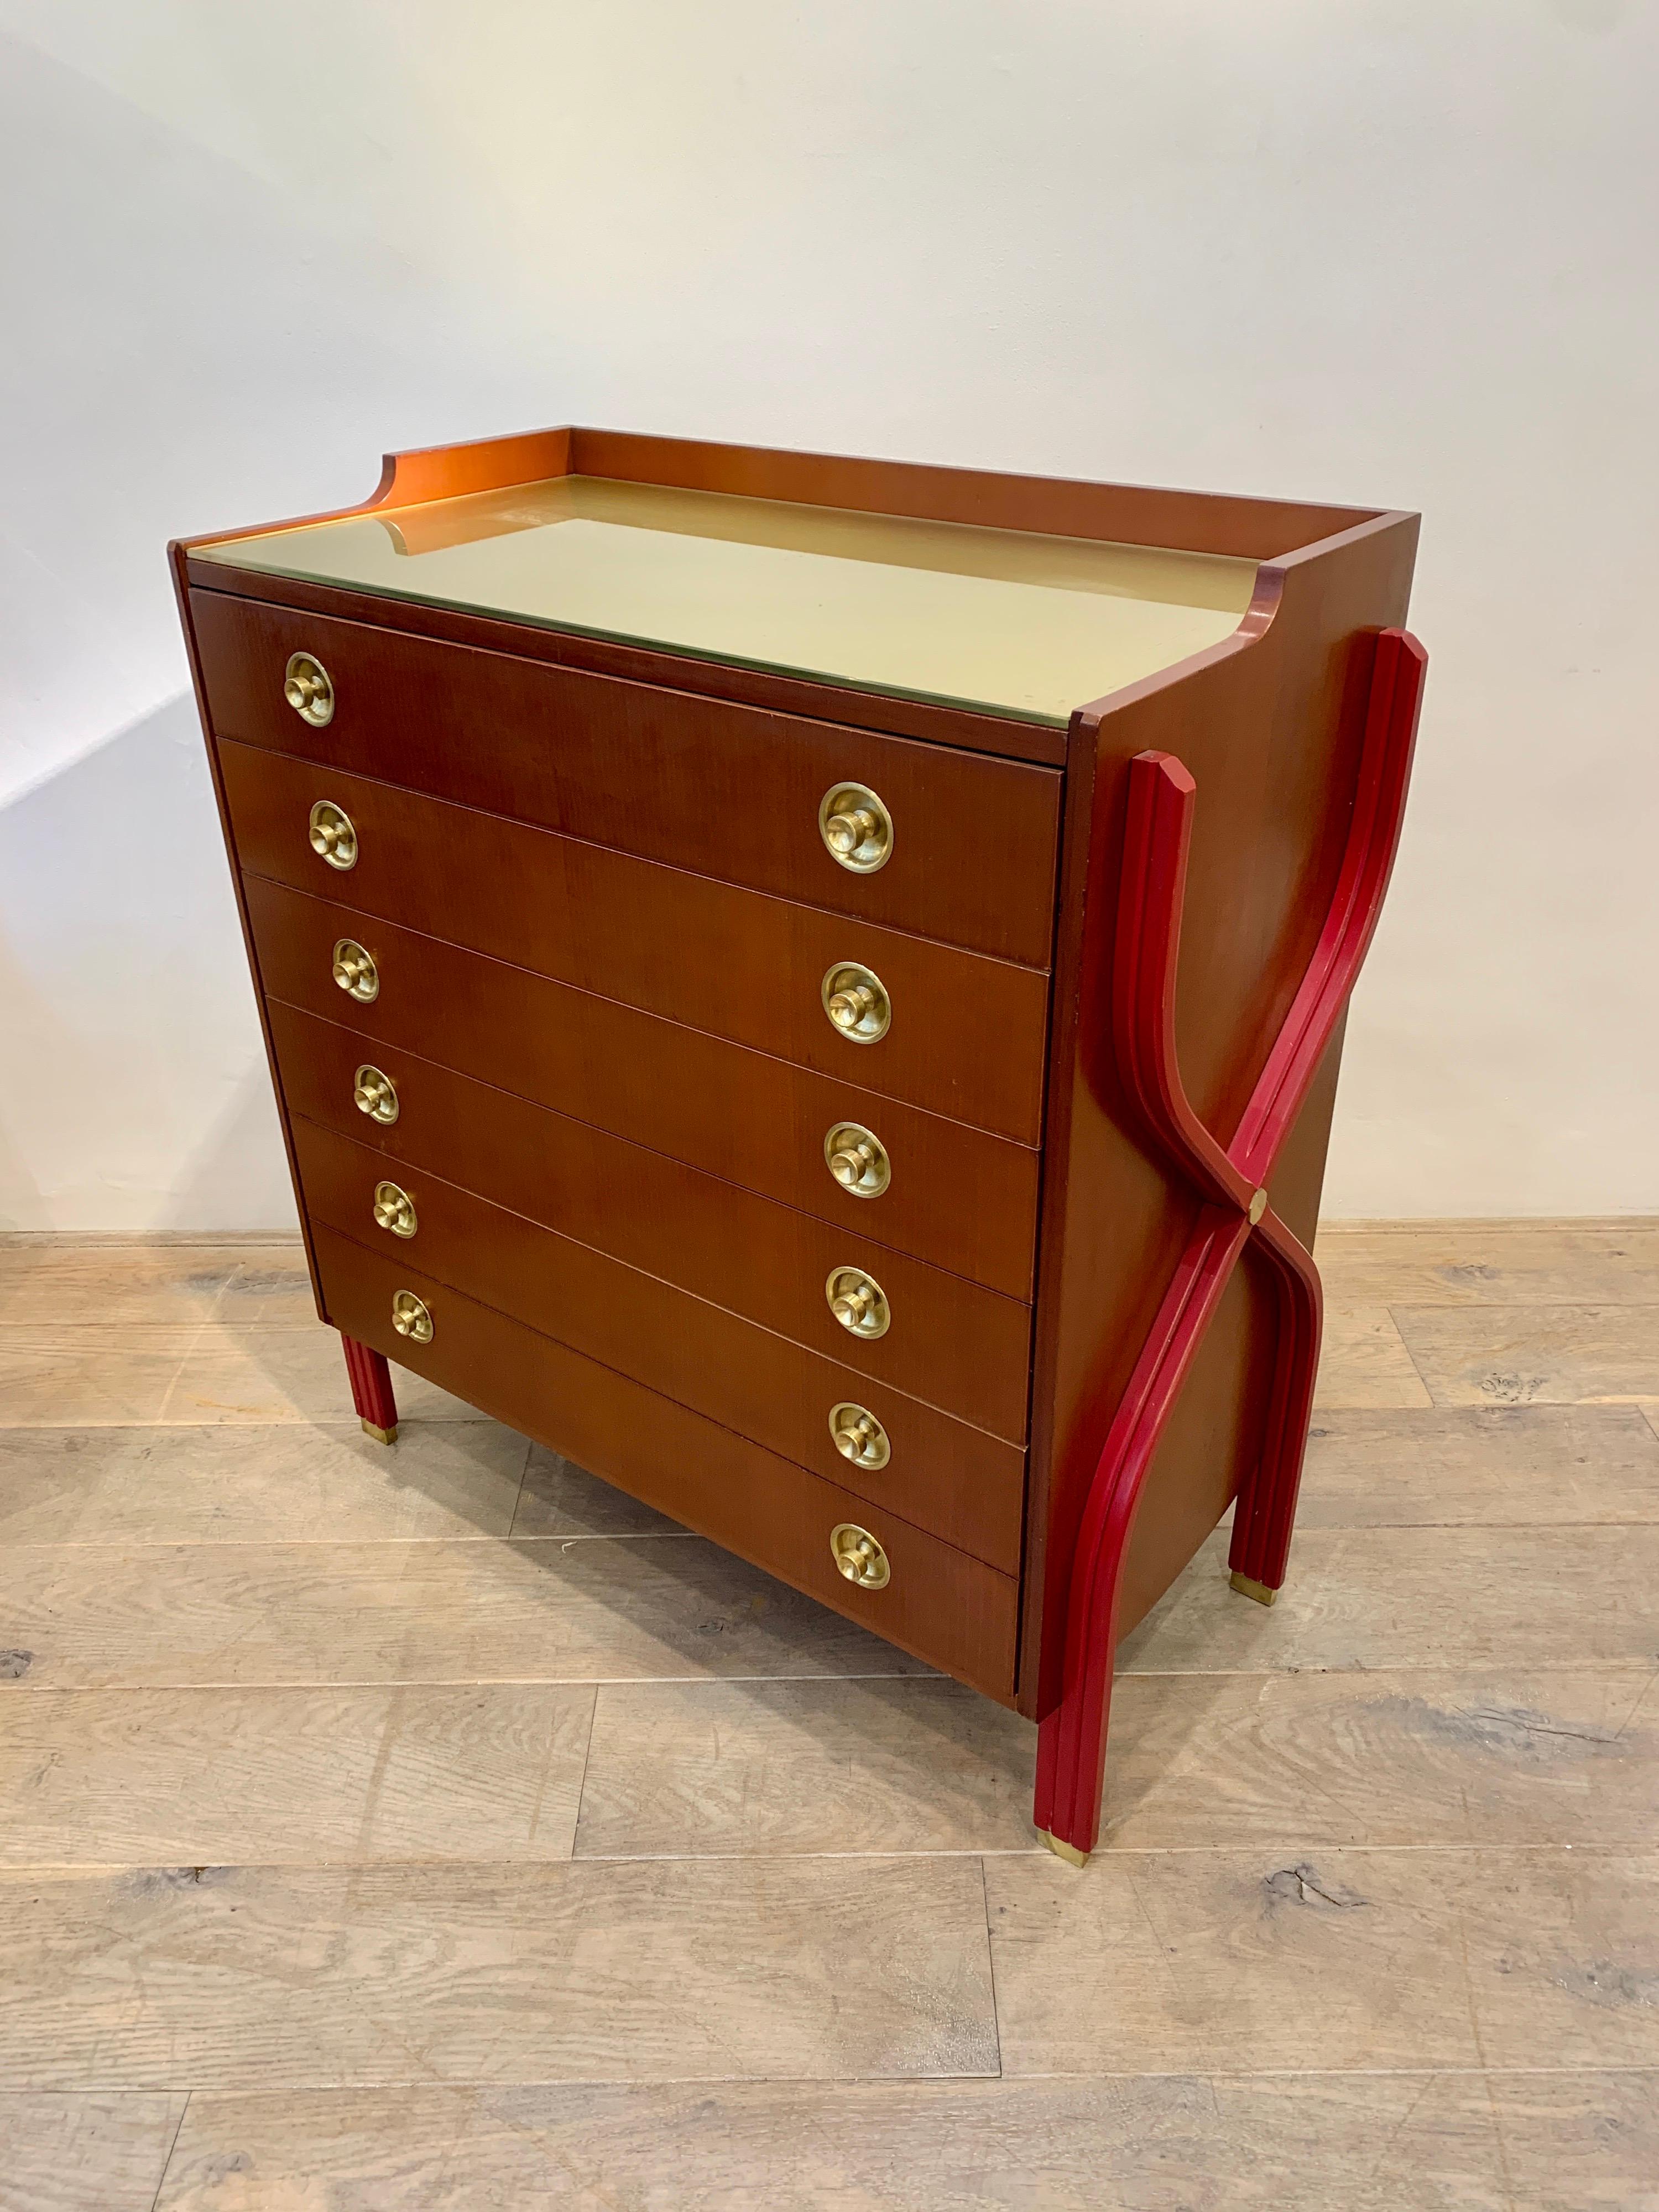 Carlo De Carli is a major Italien designer. His design was avant gardiste at the time, emphasizing the structure giving some lightness to the furniture. The lines have a kind of dynamic movement. The present commode has the characteristic of its